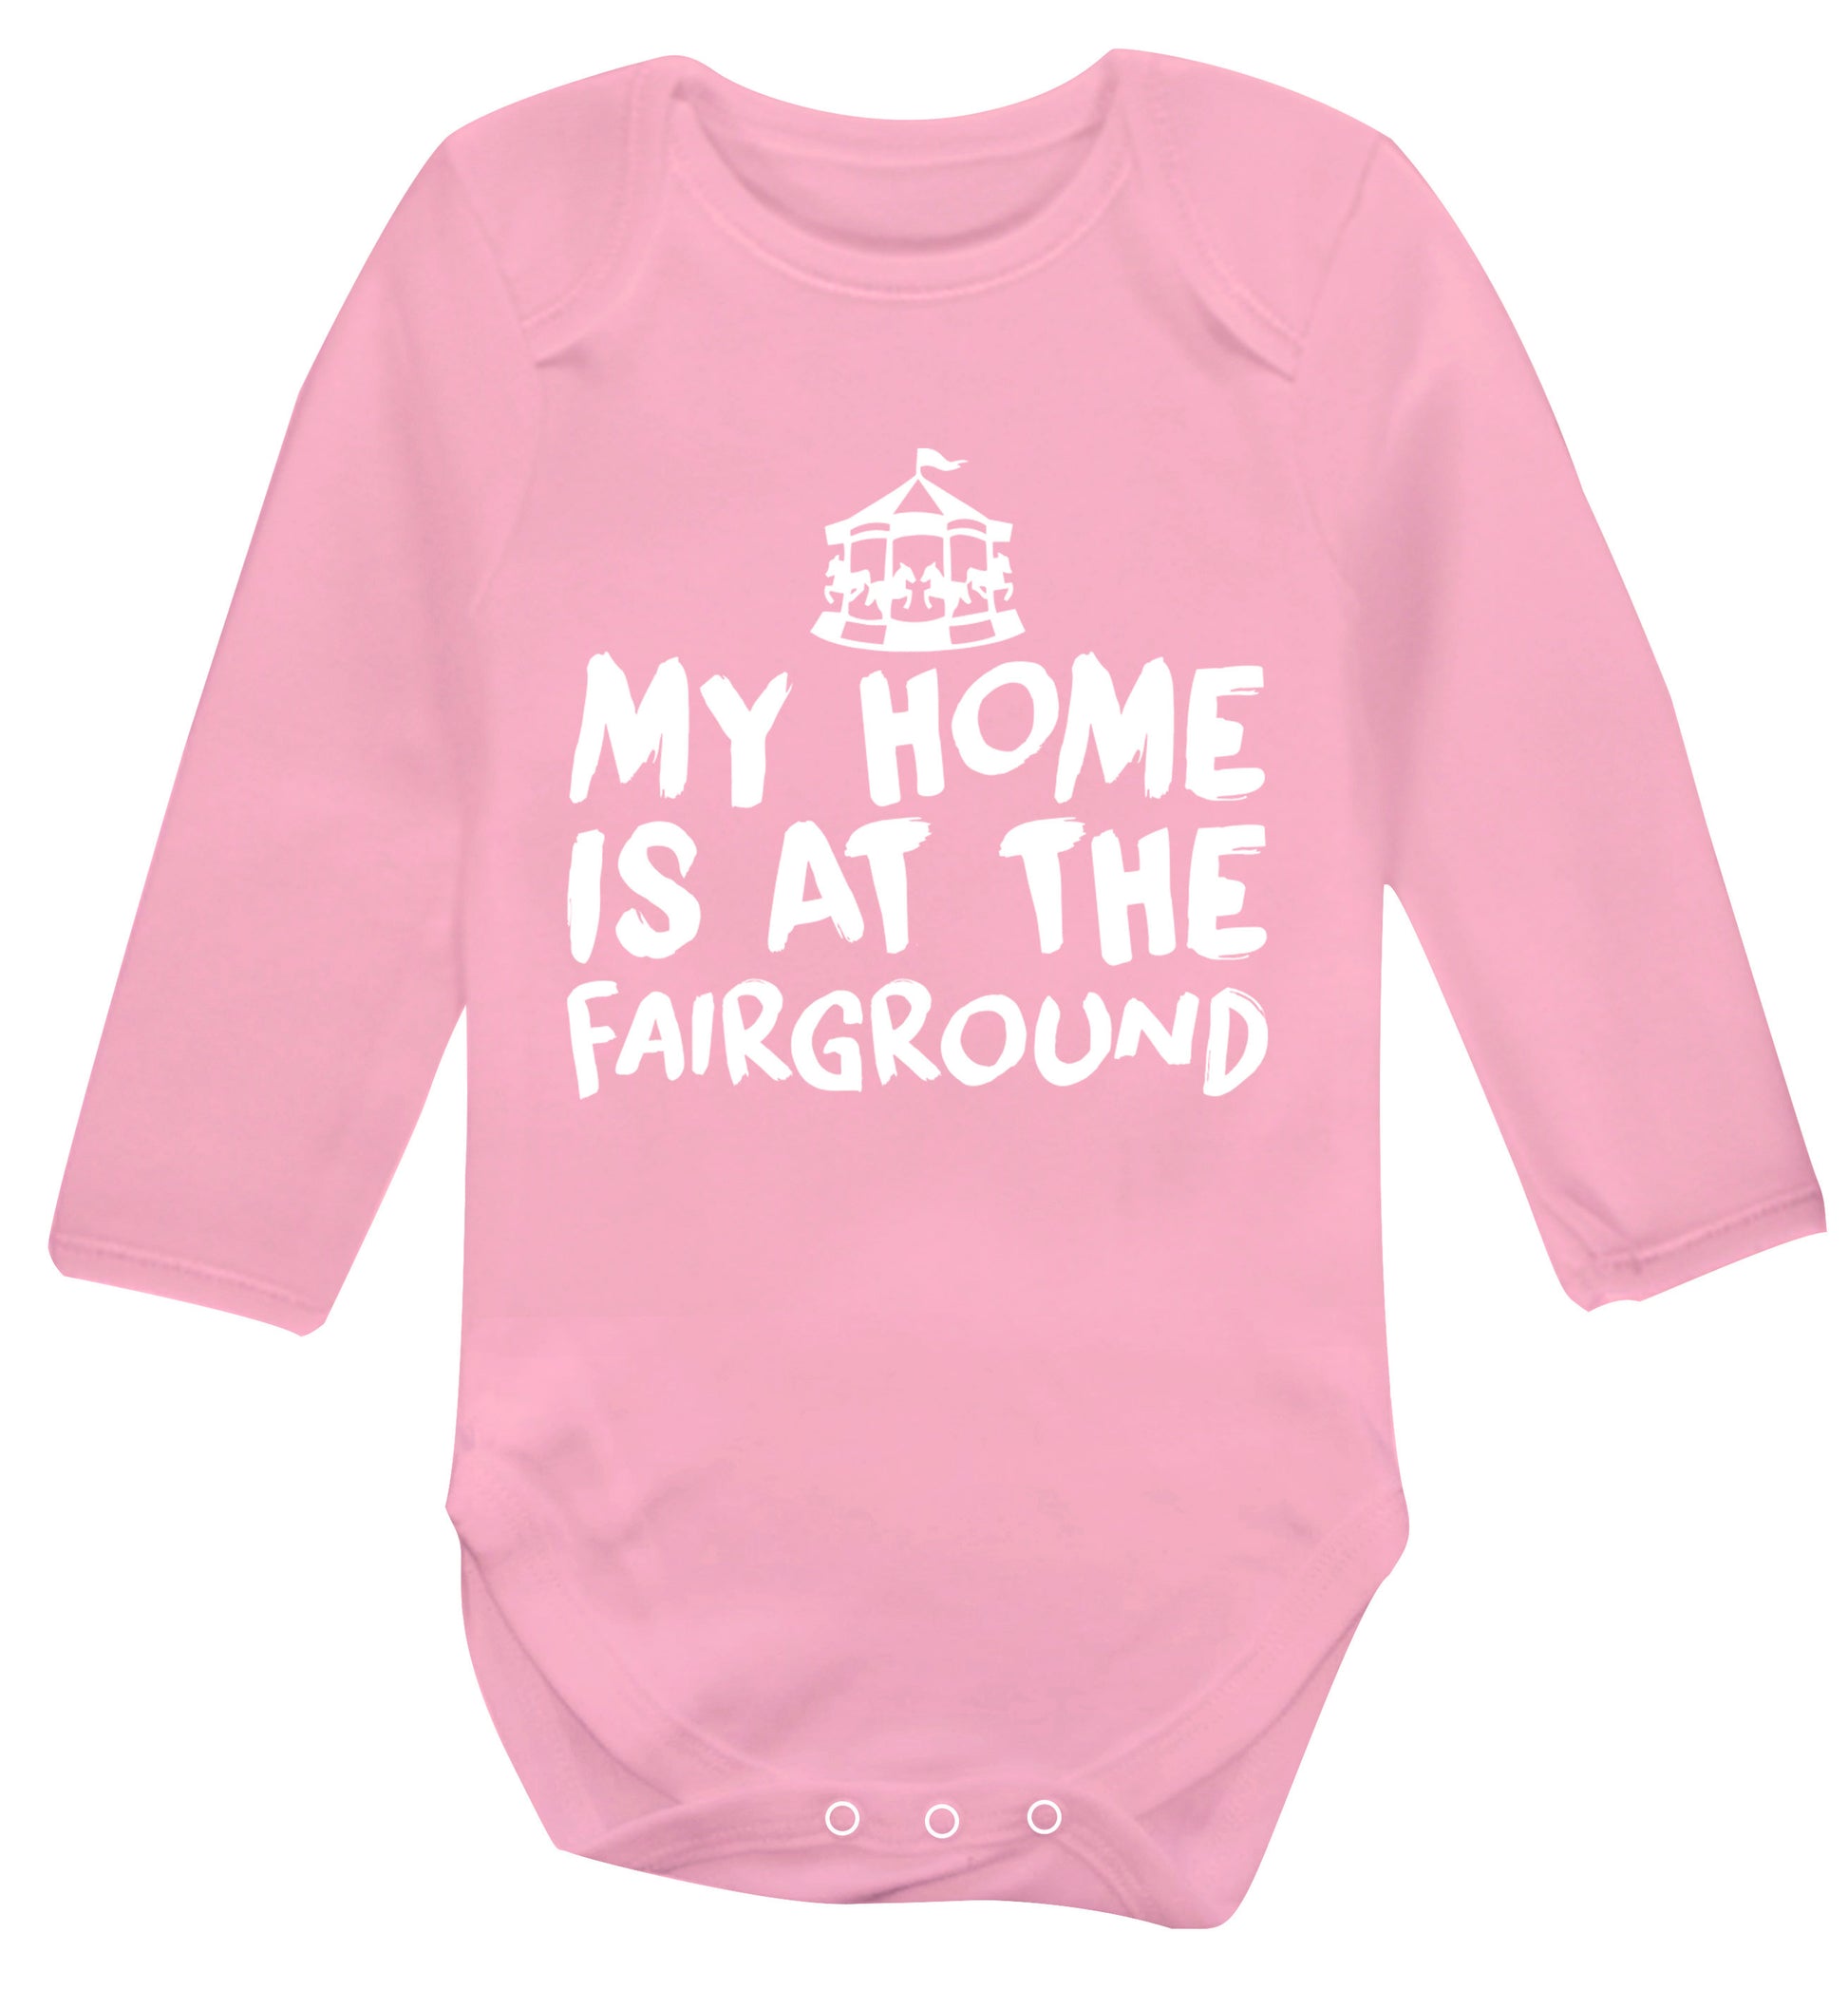 My home is at the fairground Baby Vest long sleeved pale pink 6-12 months